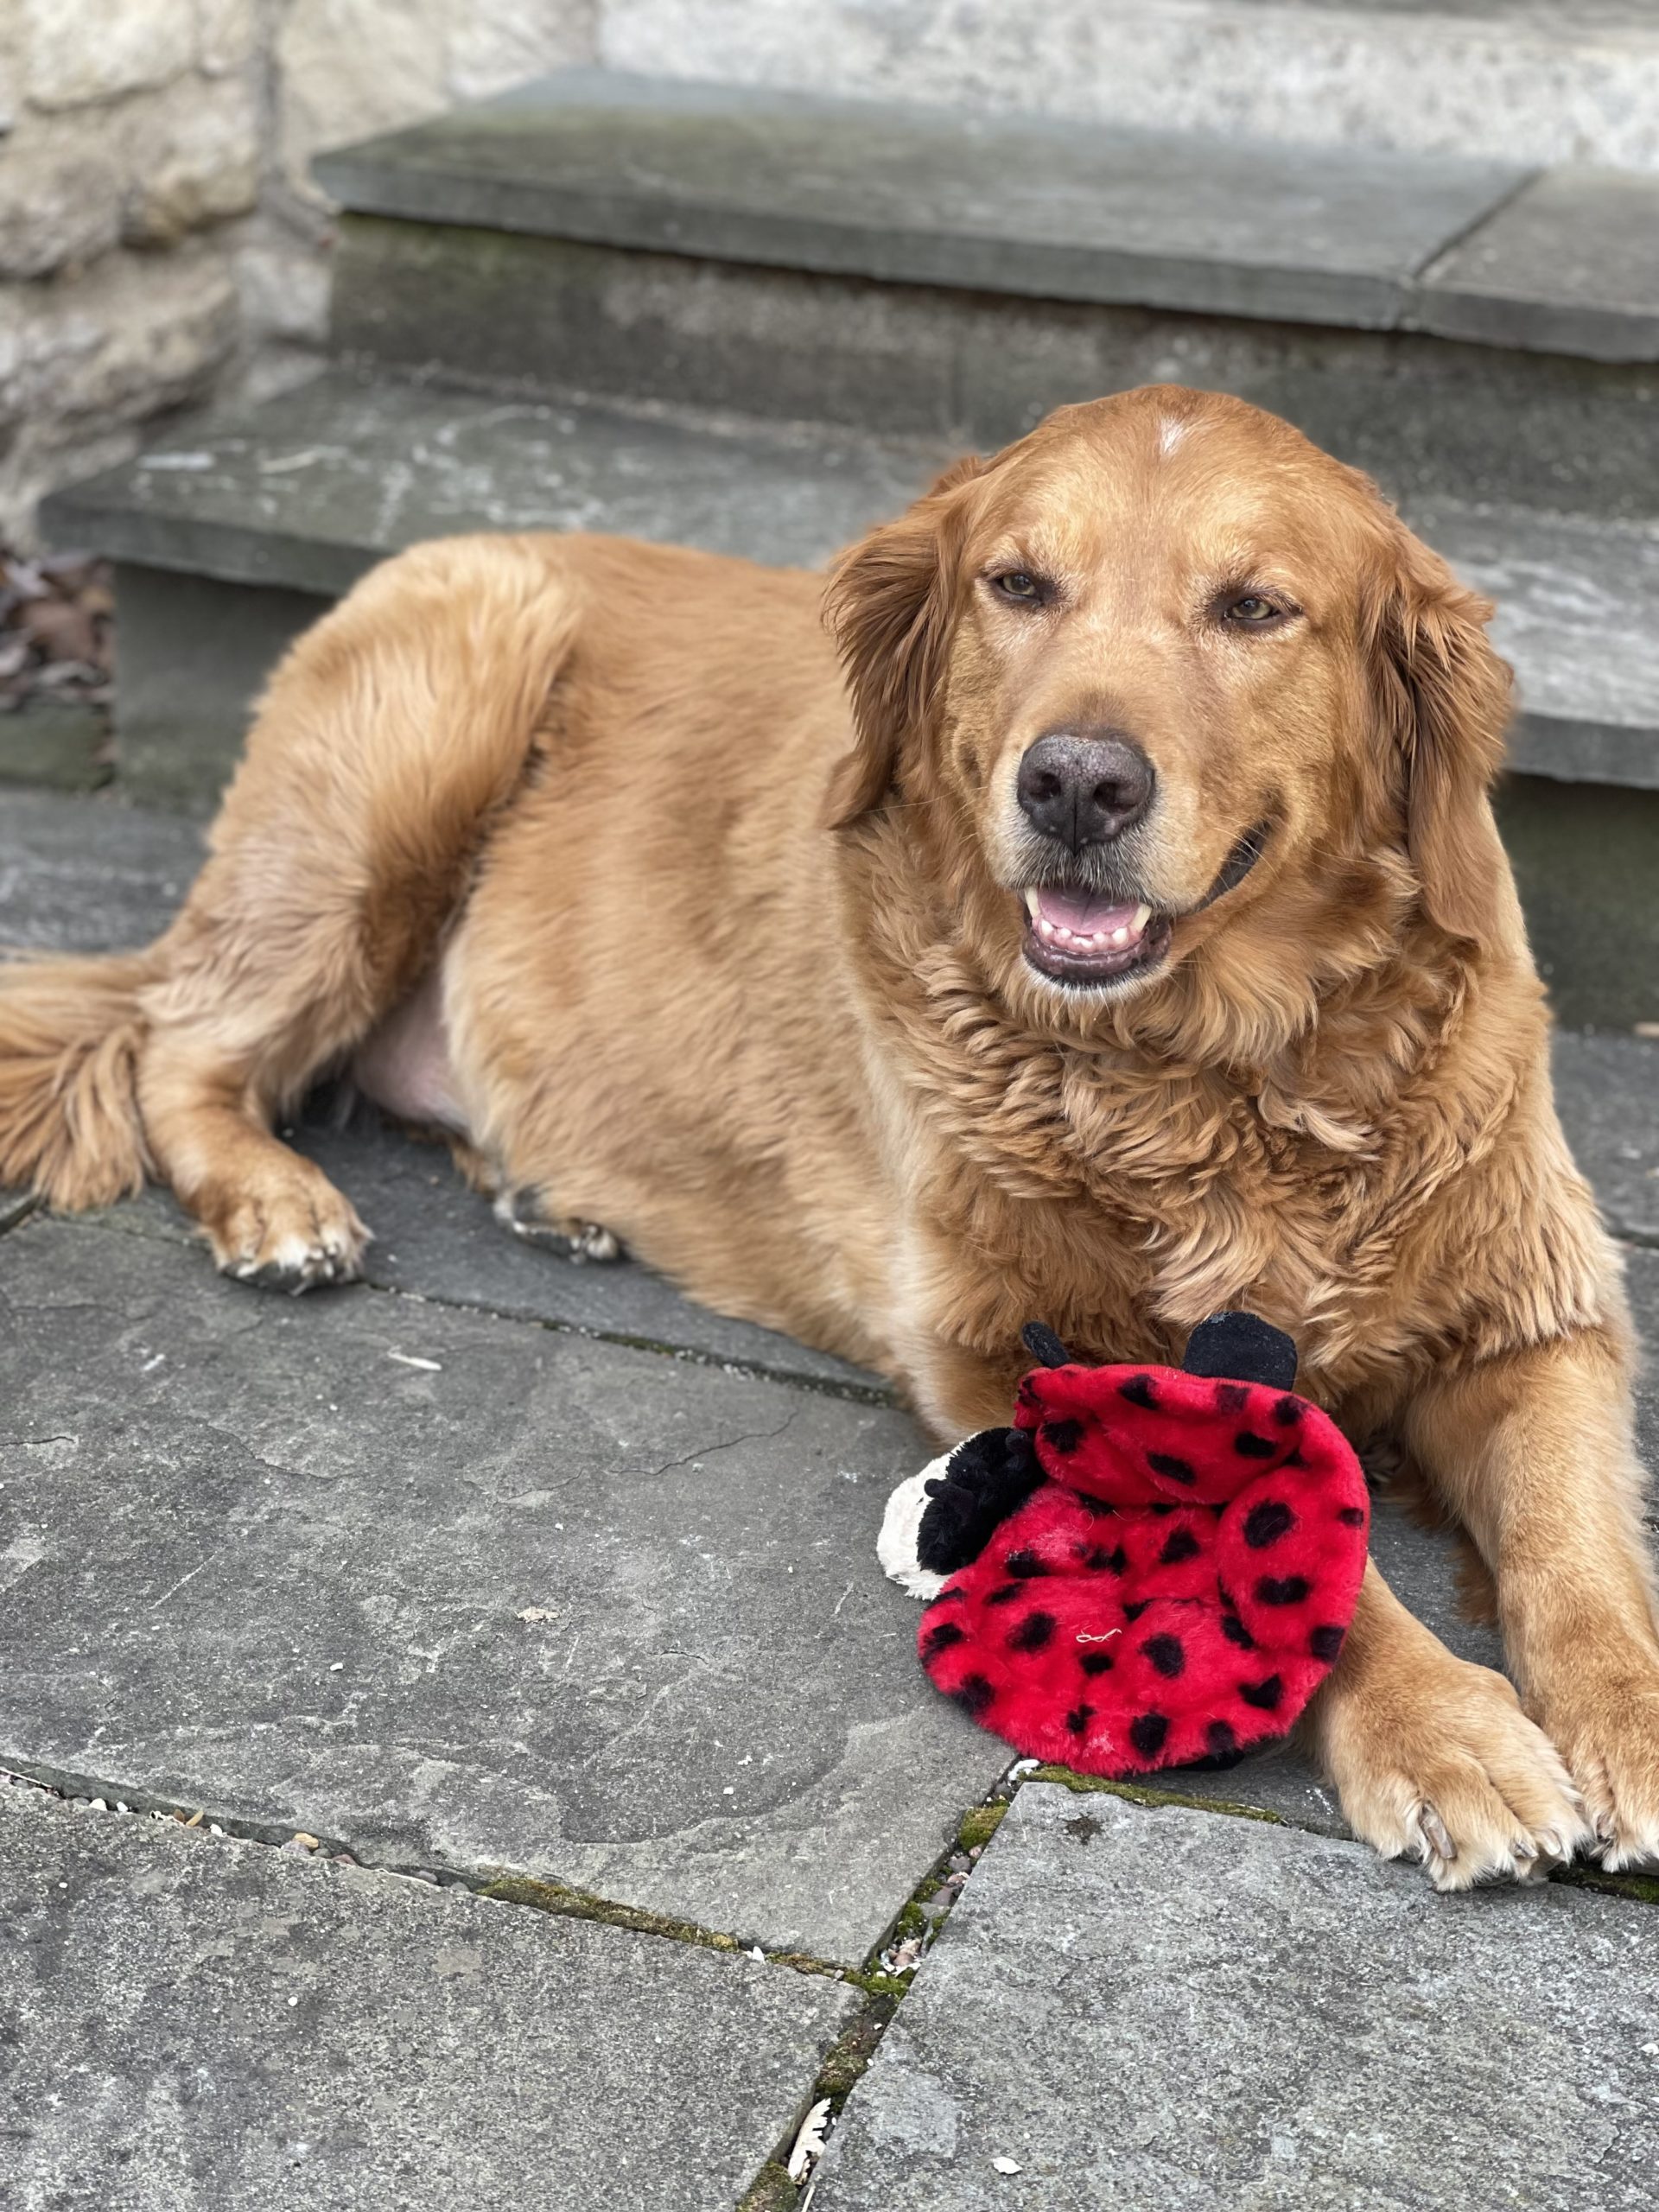 Featured image for “Dublin Retirement Village hosts retirement ‘PAWty’ for beloved therapy dog”